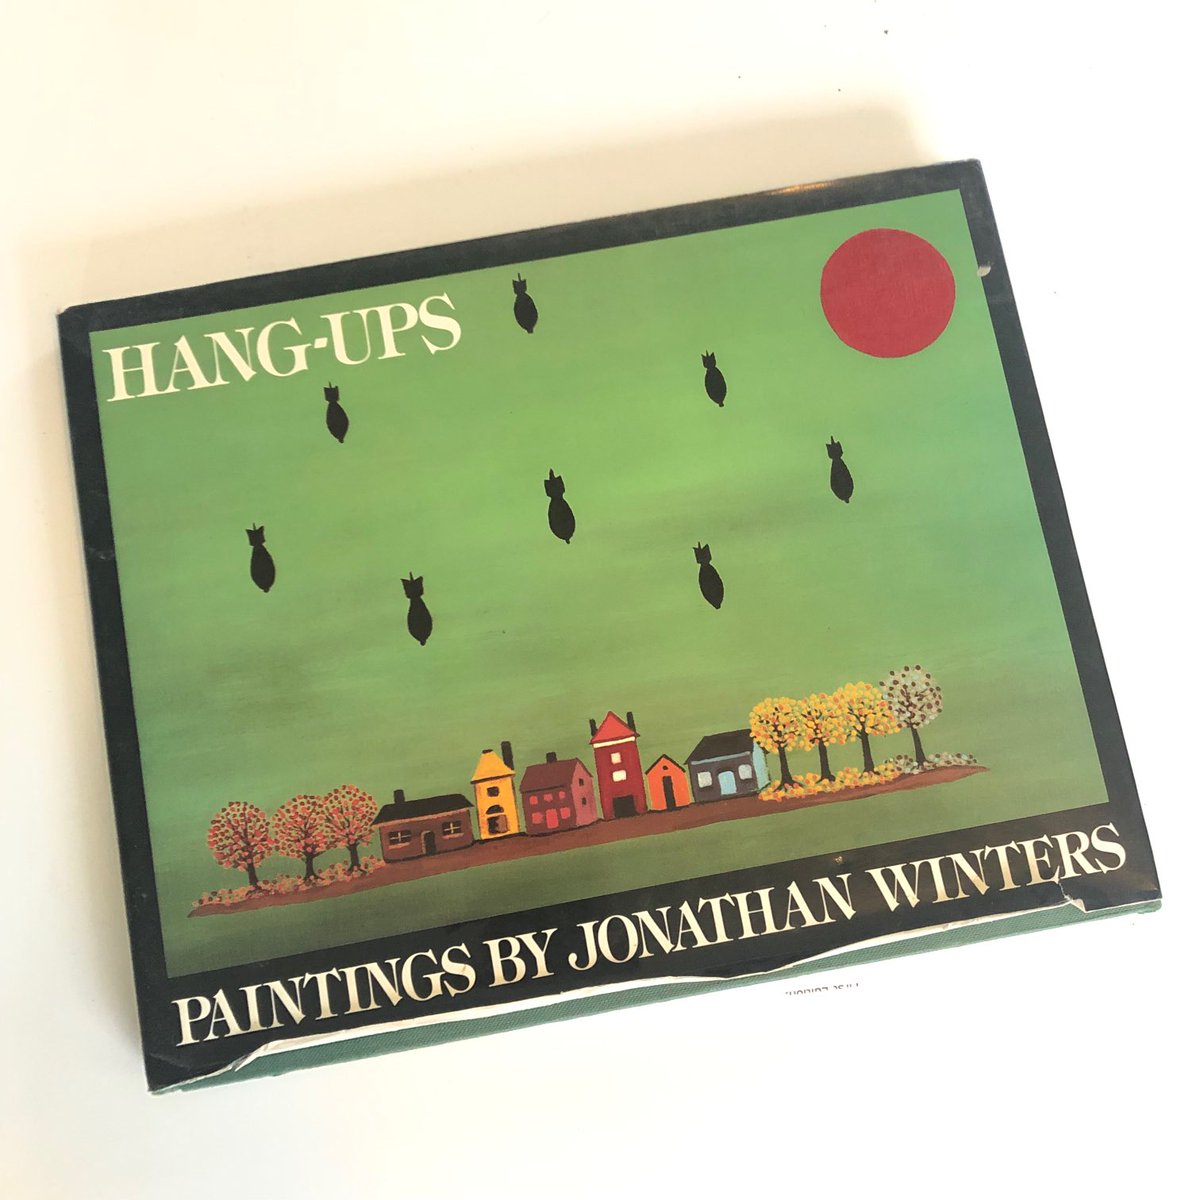 Jonathan Winters is trending.... thought I’d remind everyone he was not just one of the funniest comedians but also a talented painter. I bought this book for my dad in 1993 #JonathanWinters